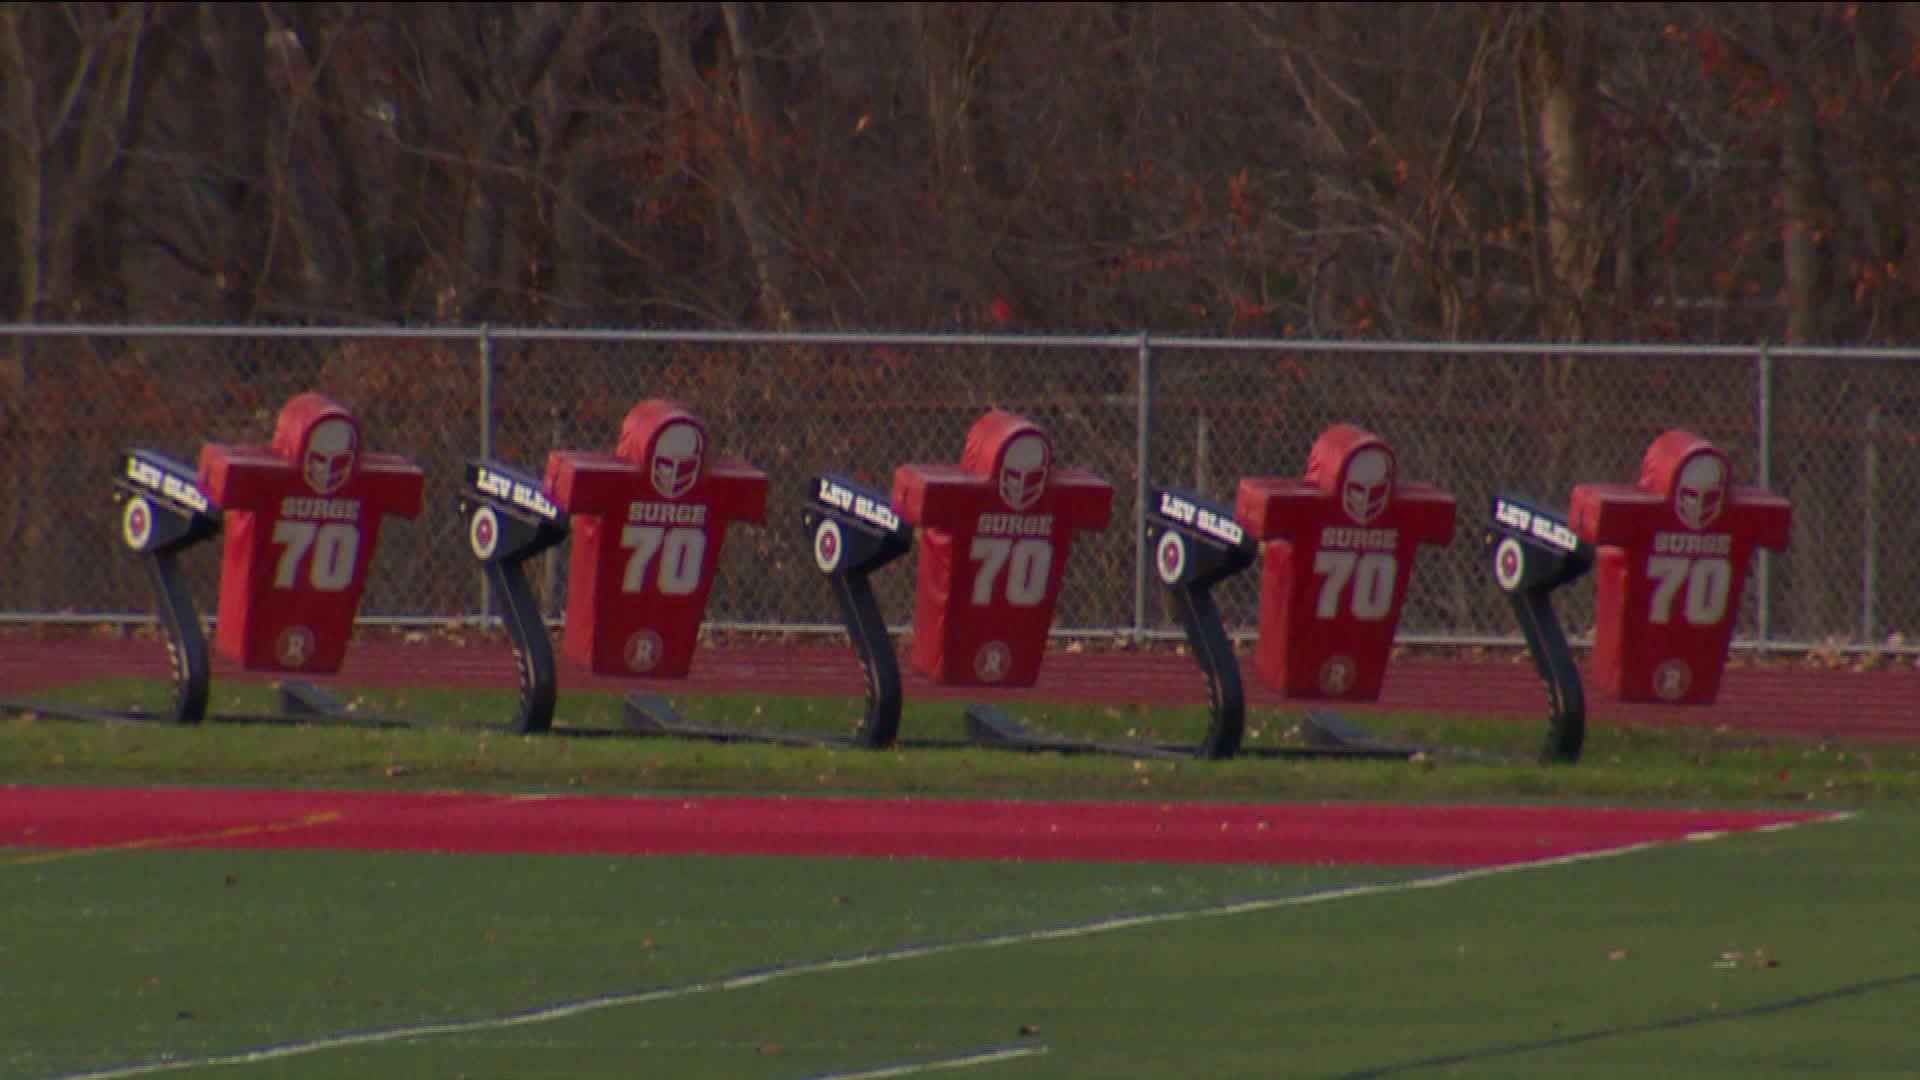 Wolcott High School forced to forfeit senior night game as ordered by superintendent